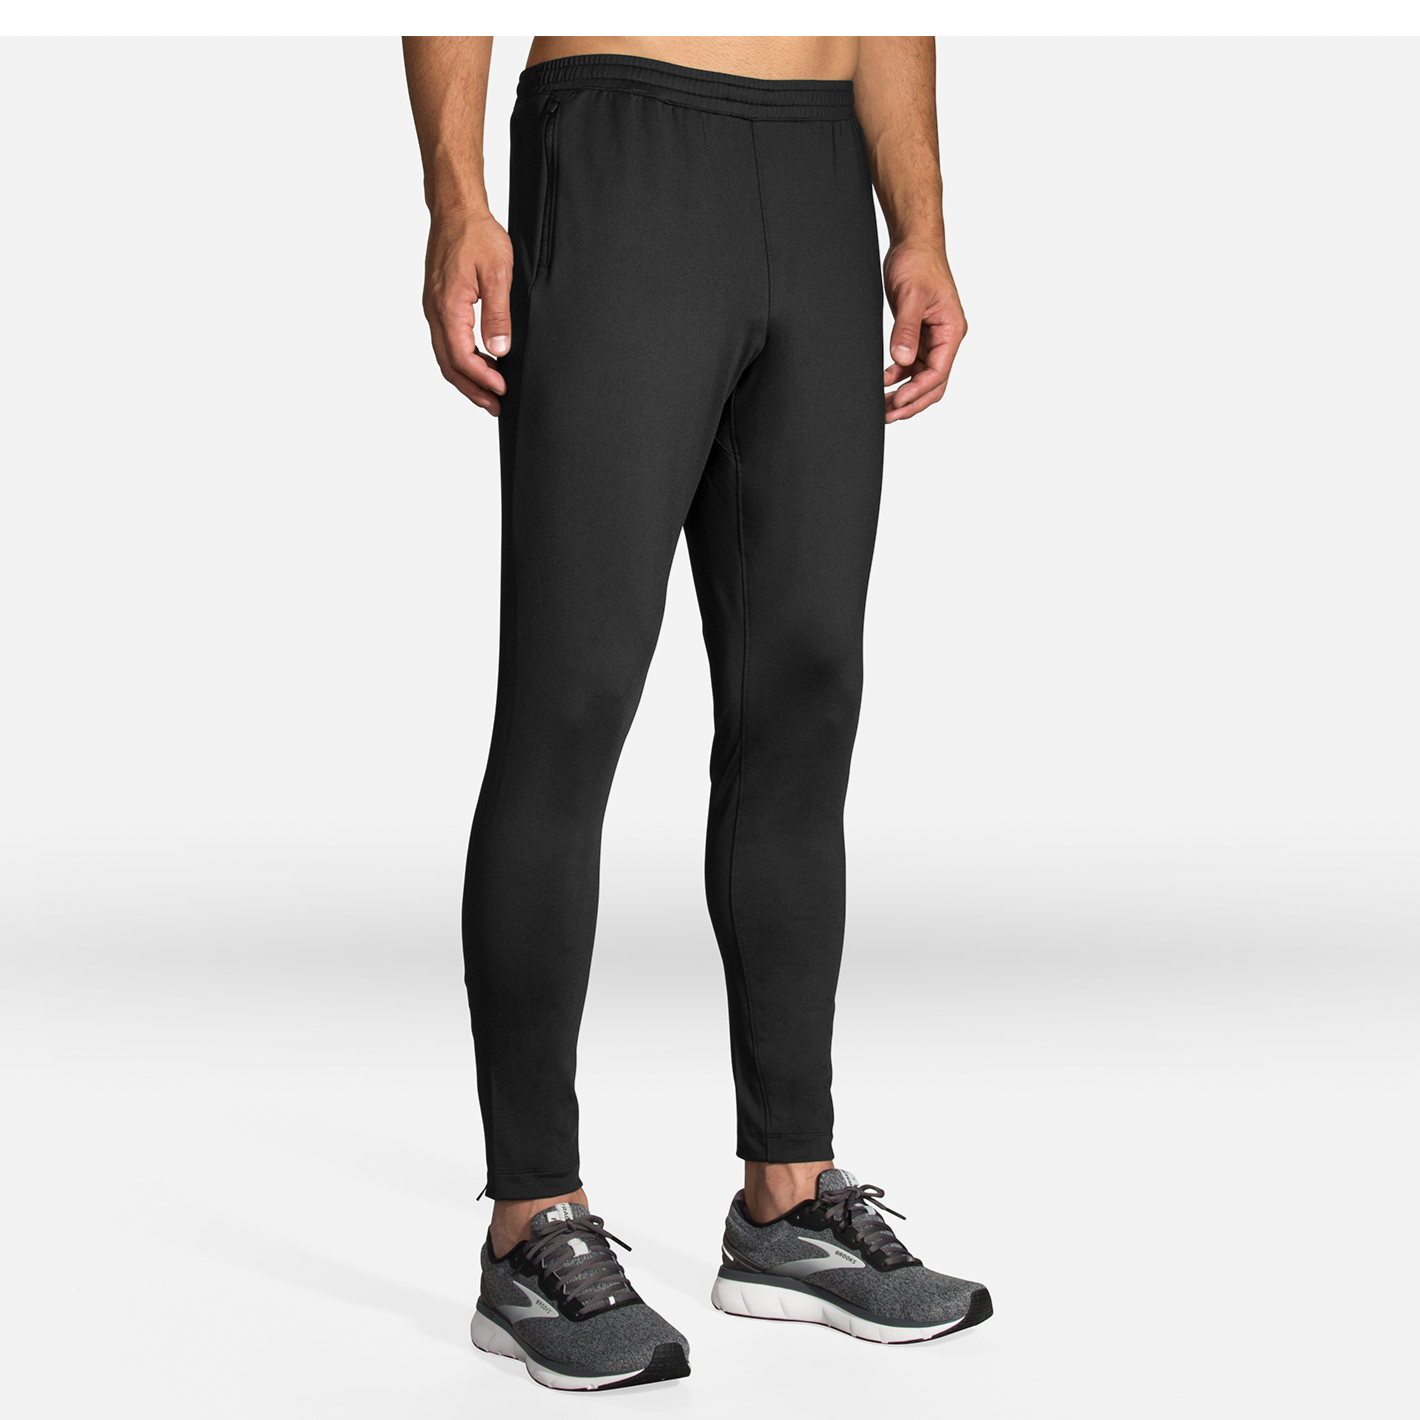 MEN'S PHENOM ELITE TIGHT  Performance Running Outfitters